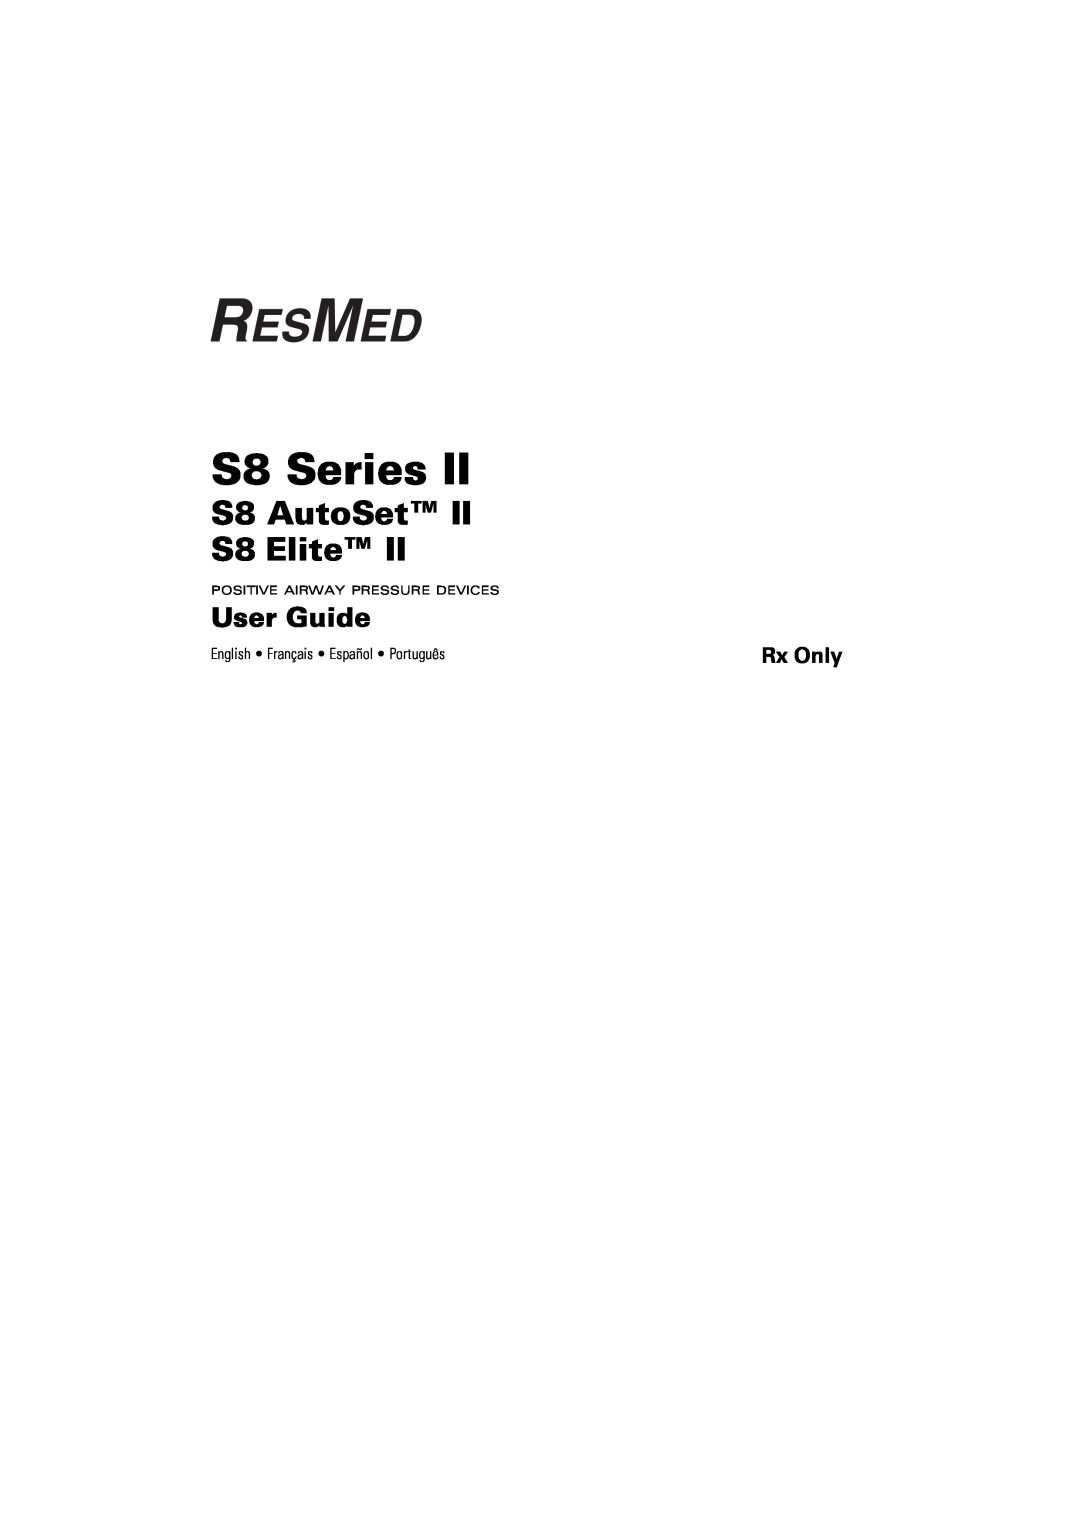 ResMed s8 manual S8 Series, S8 AutoSet S8 Elite, User Guide, Rx Only 